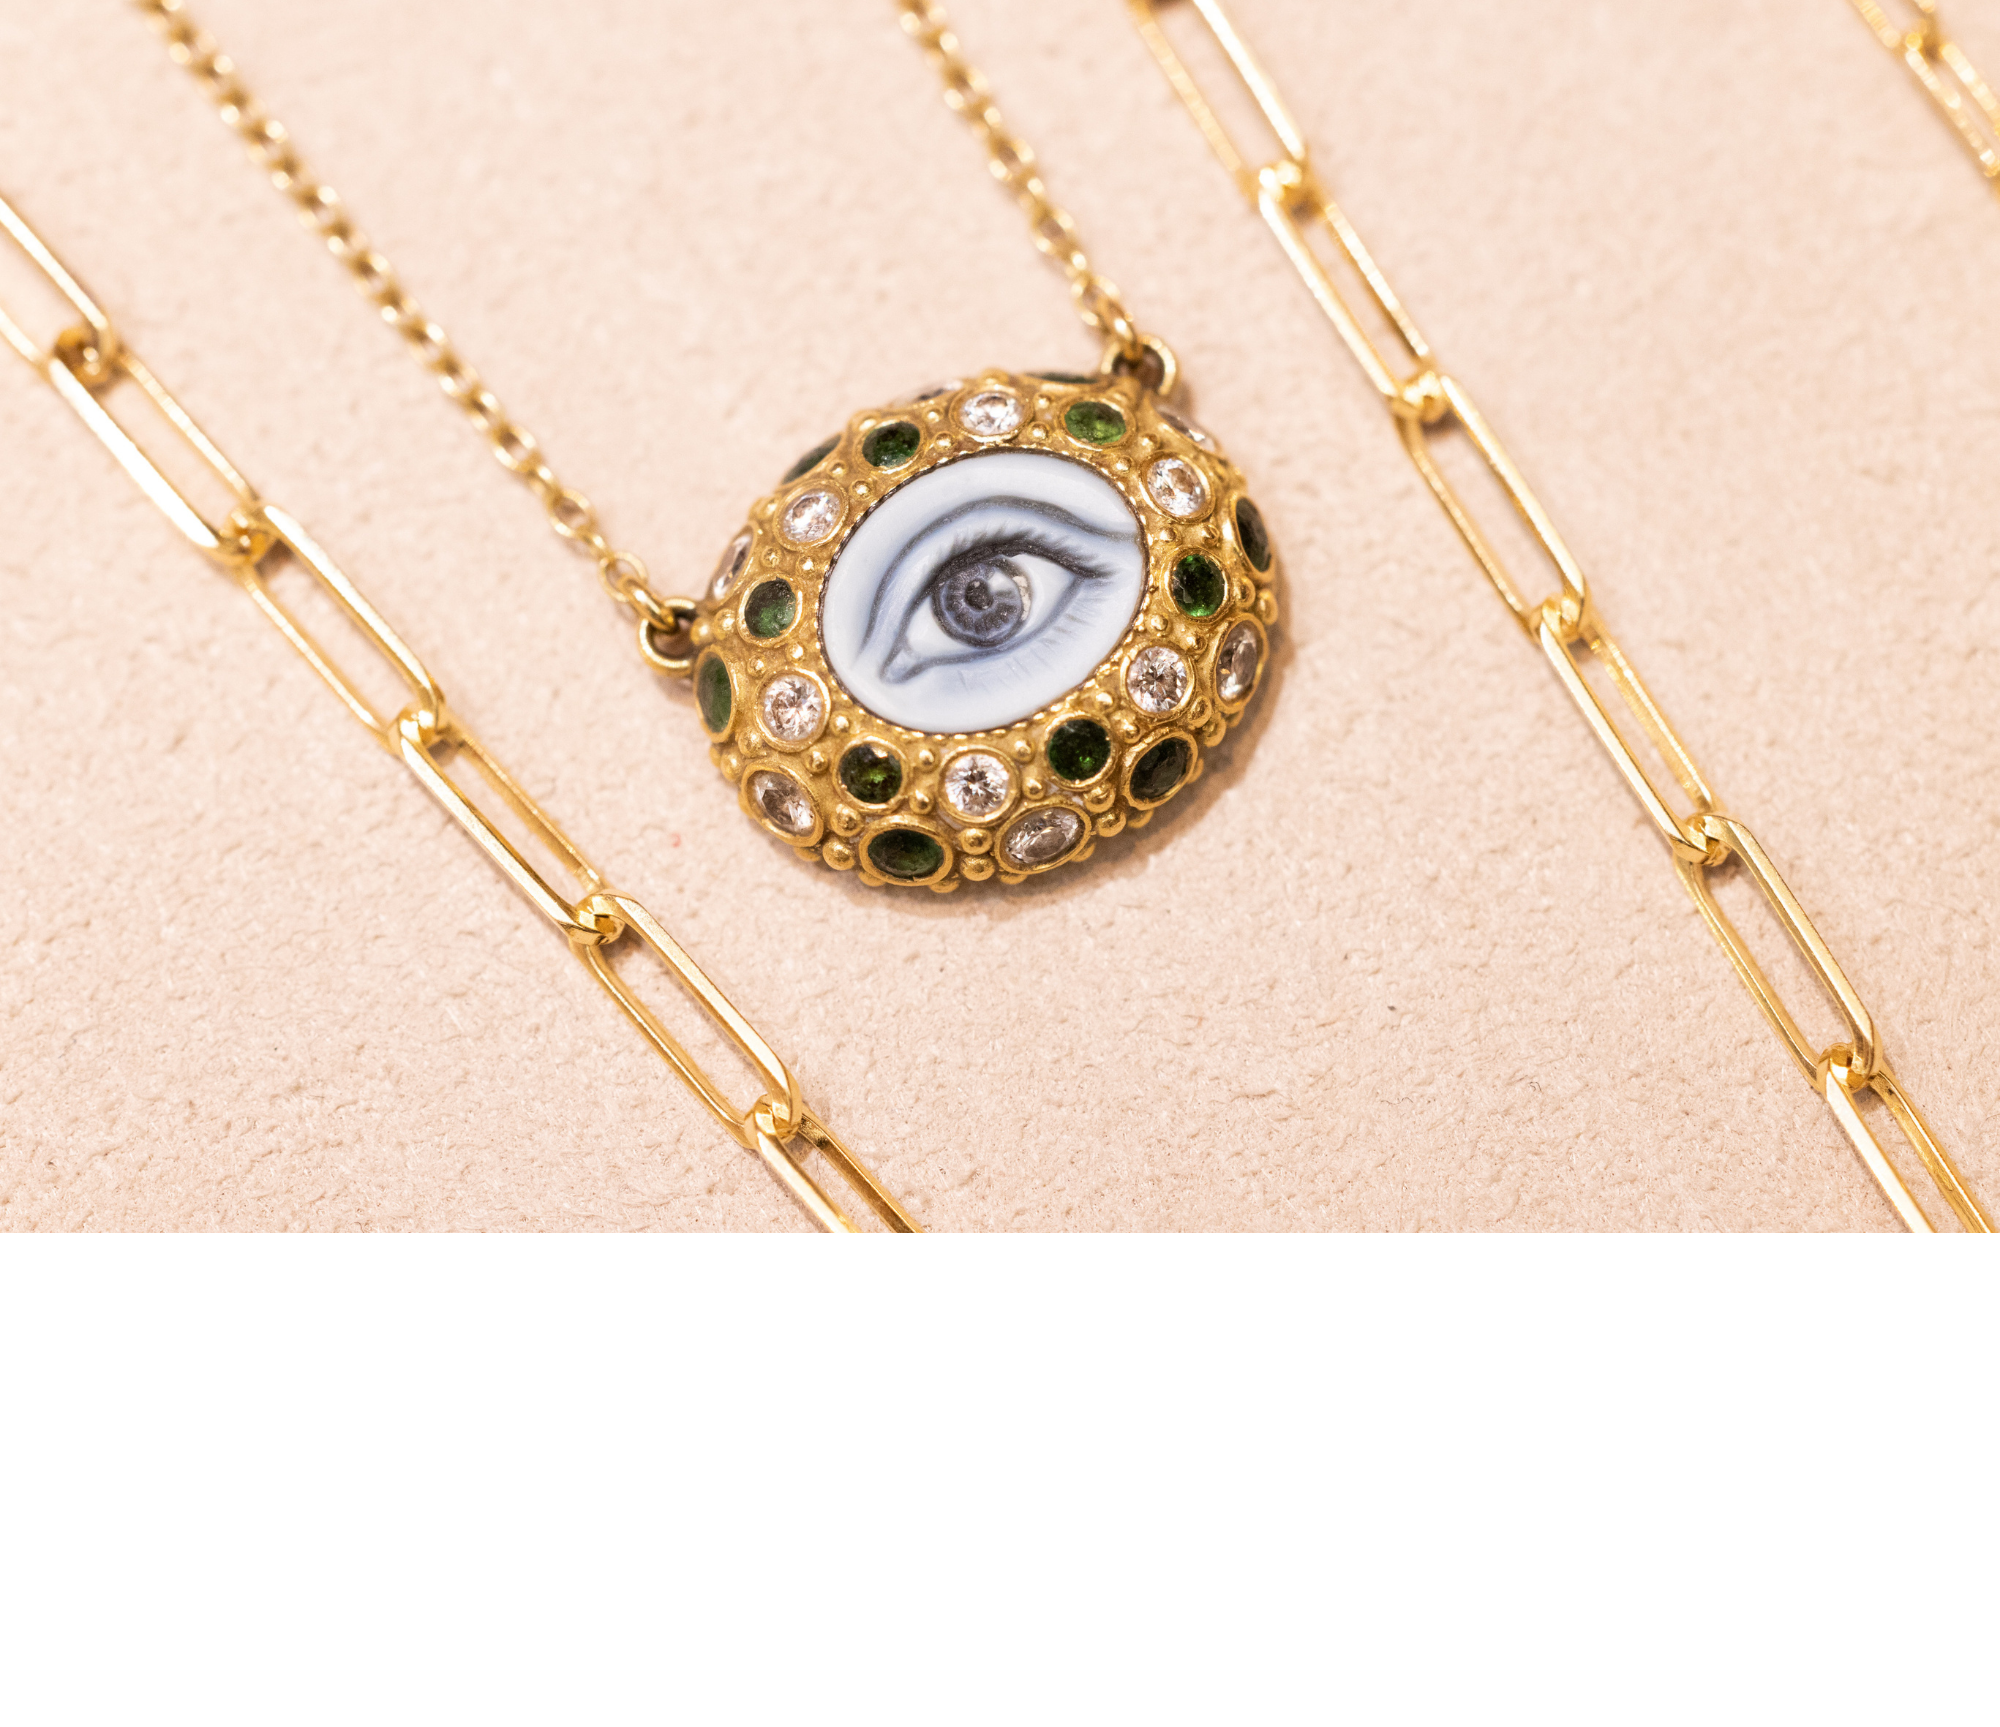 Eye necklace coming soon to Ana Katerina 